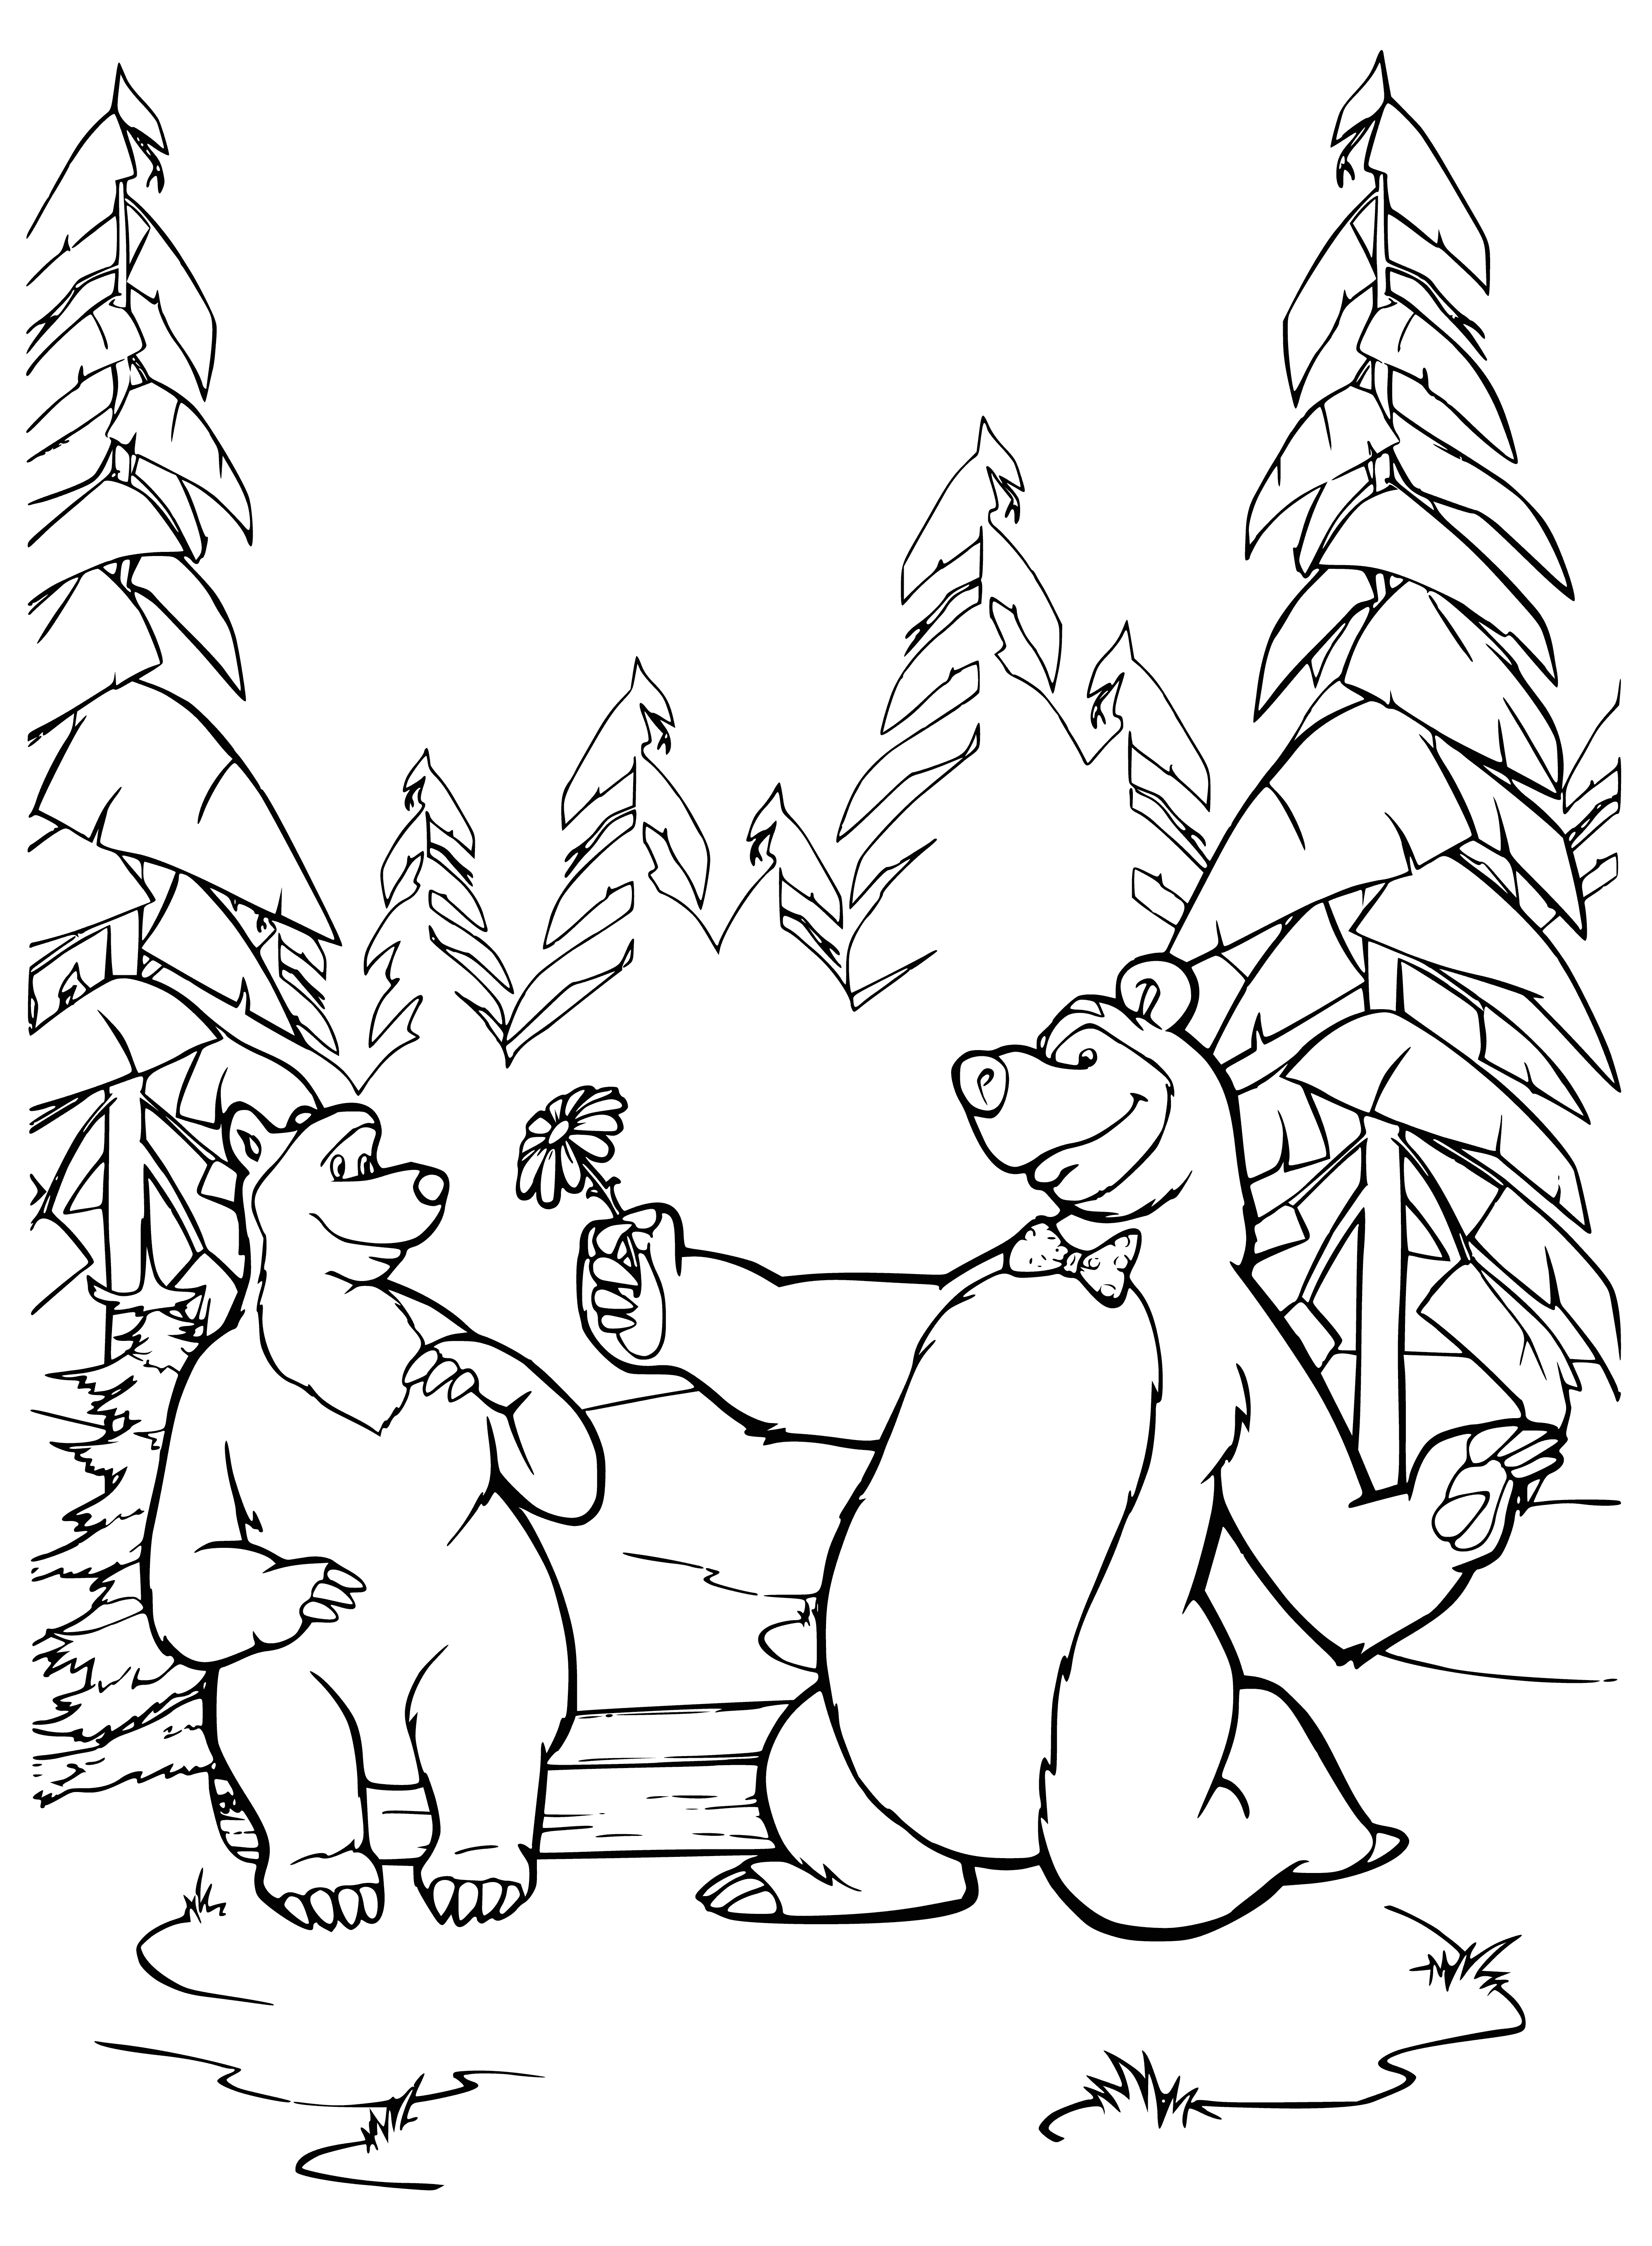 coloring page: Cute teddy bear holds flower: looks happy & content.